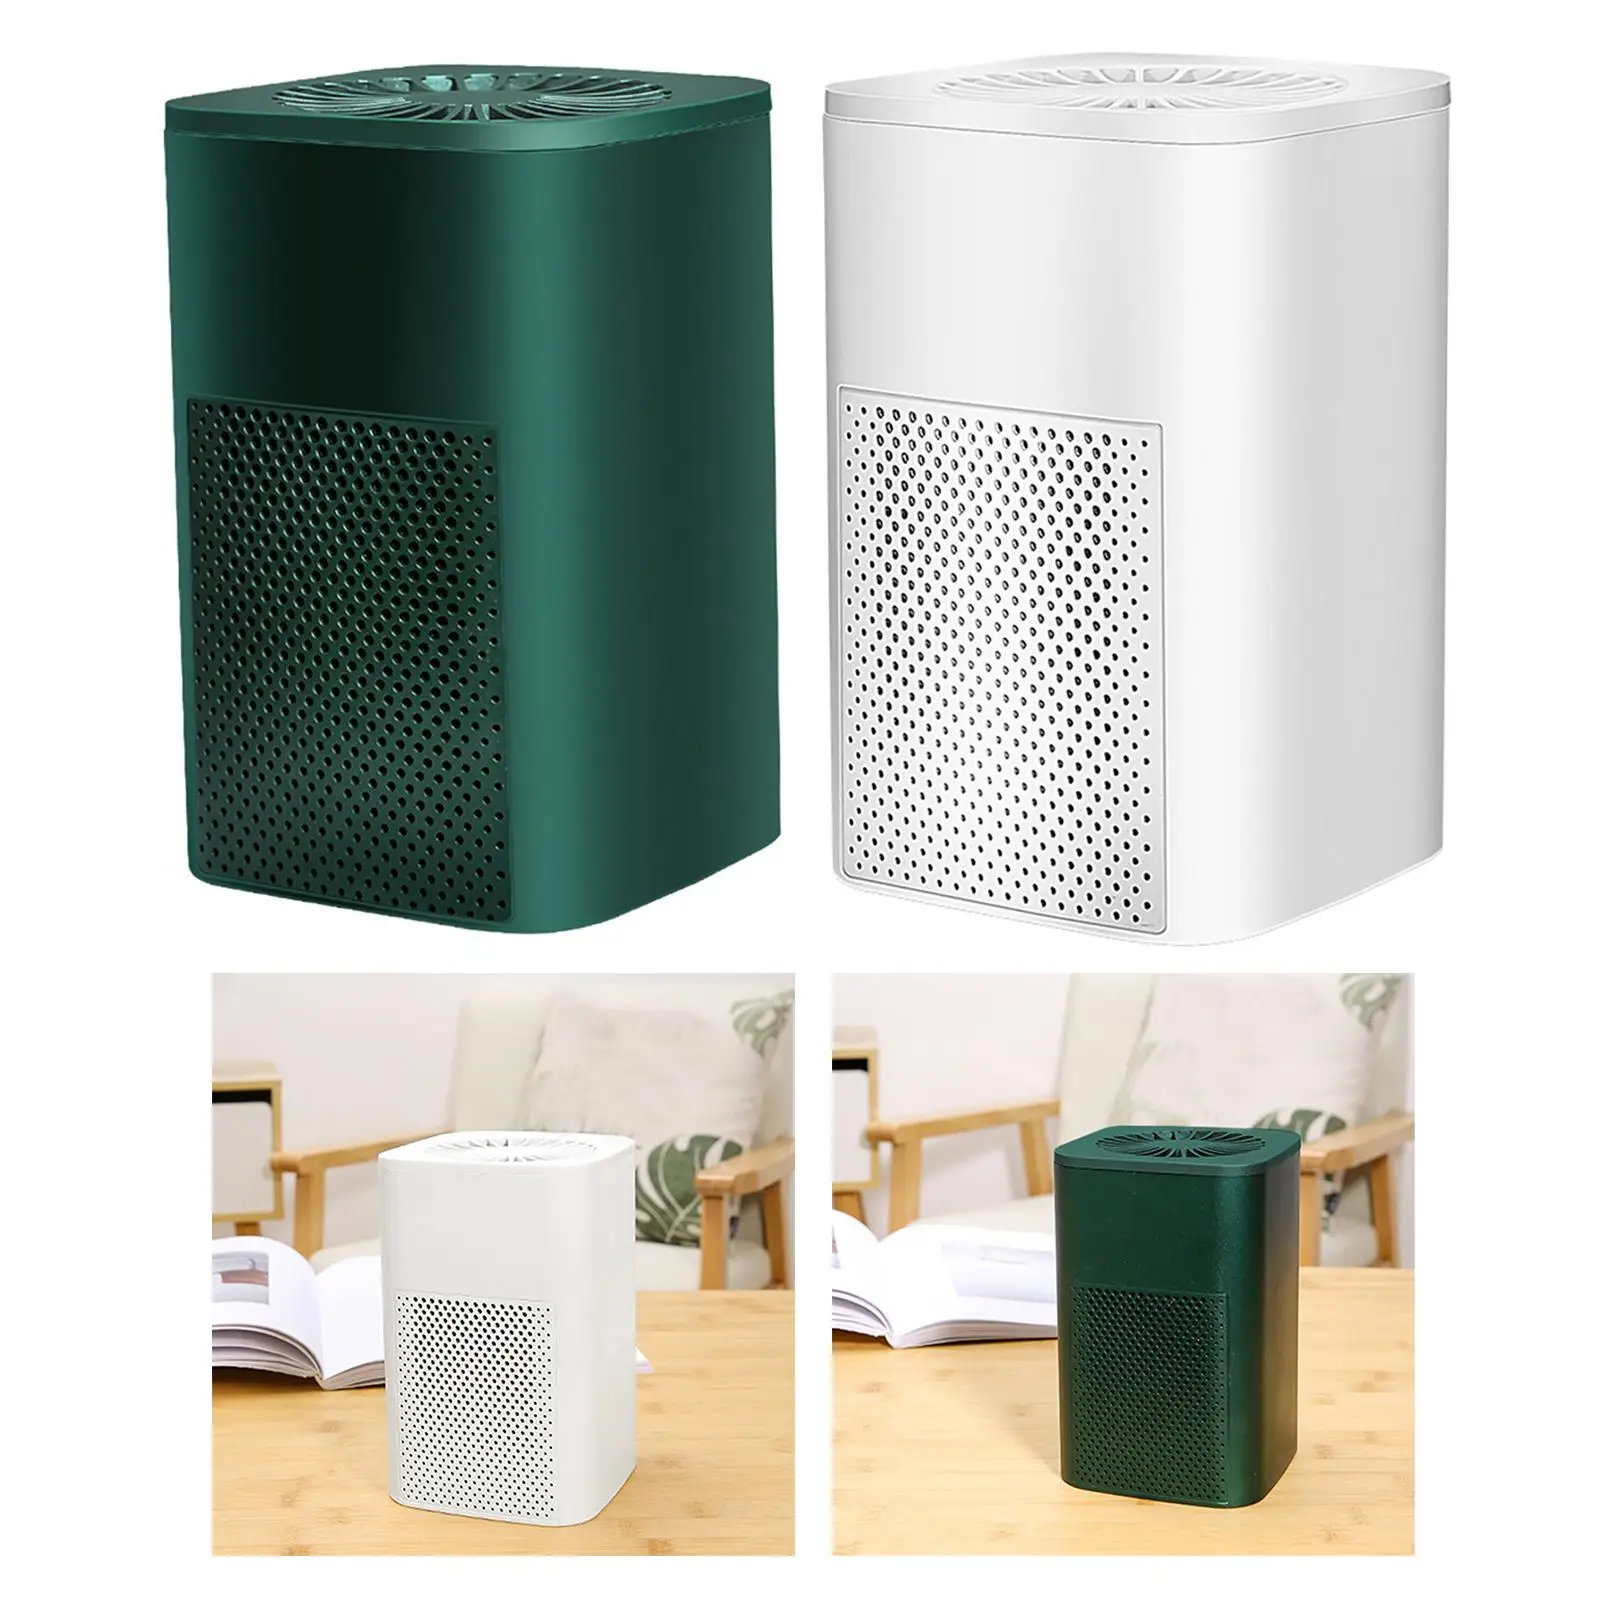 Portable Mini Air Purifier 2 Layer Activated Carbon USB Powered Desktop Home Air Cleaner Removes Smoke Dust Odor Pet Allergies